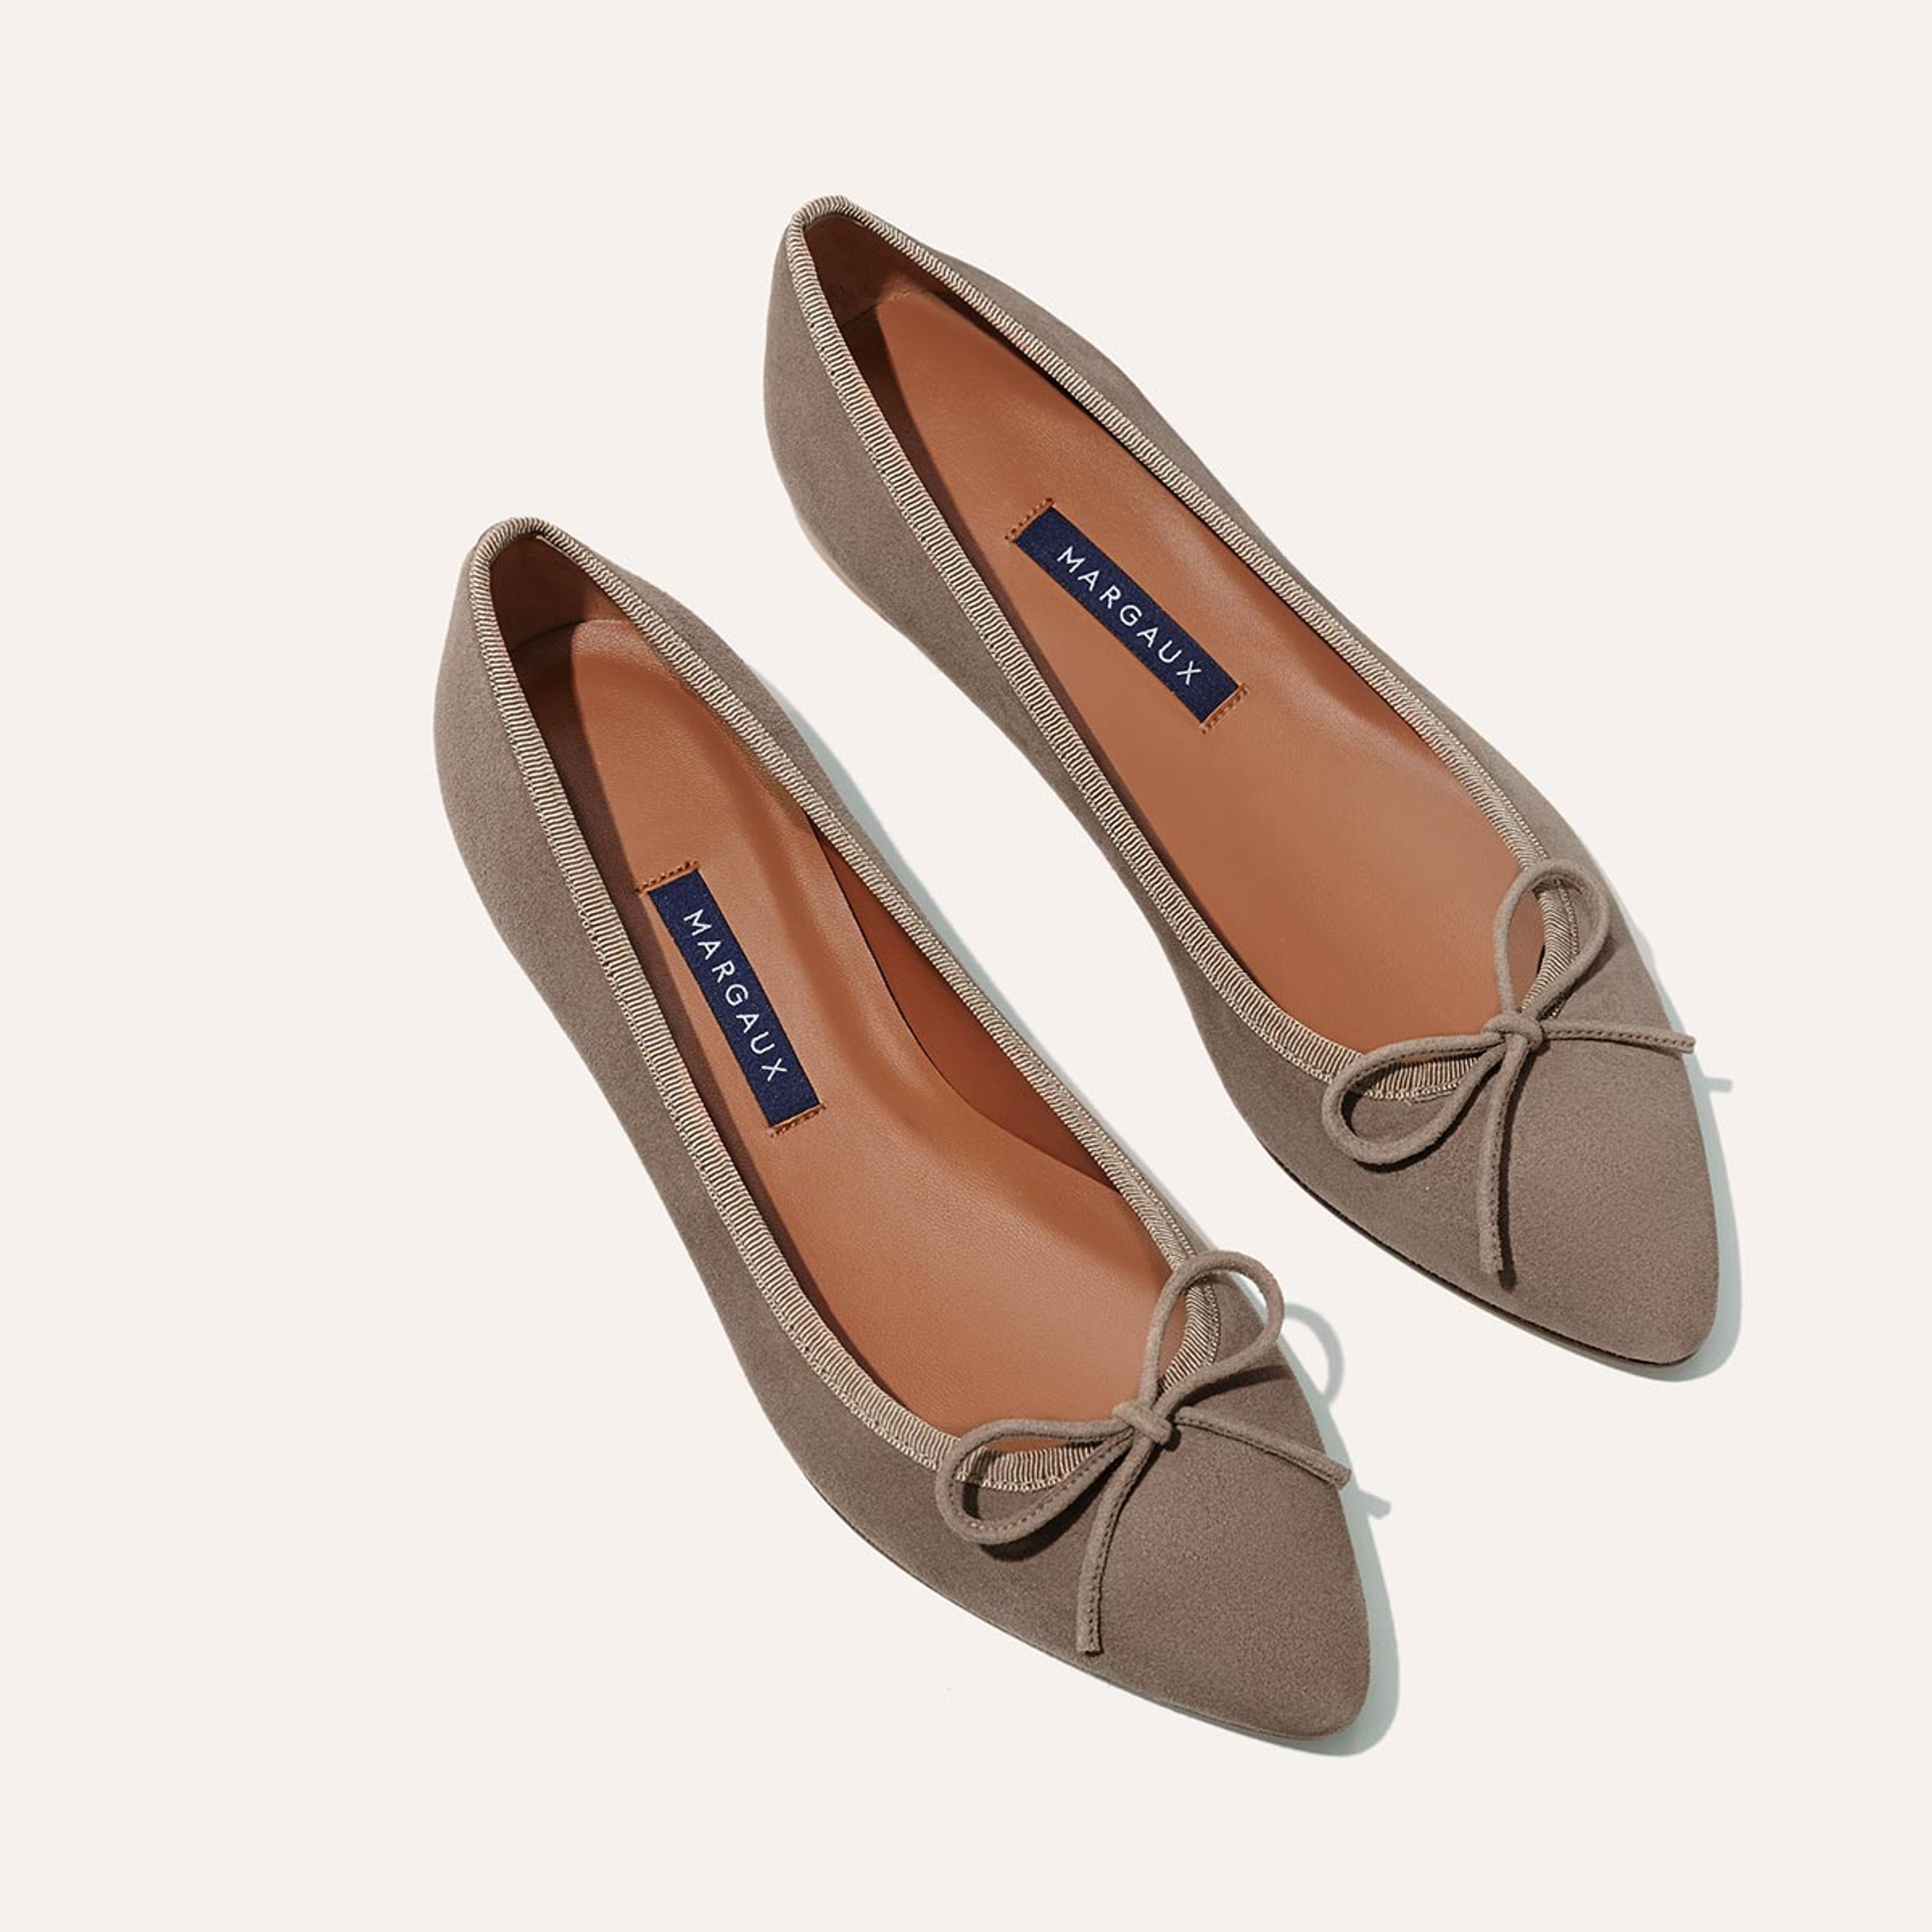 Margaux The Pointe - Taupe Suede on Marmalade